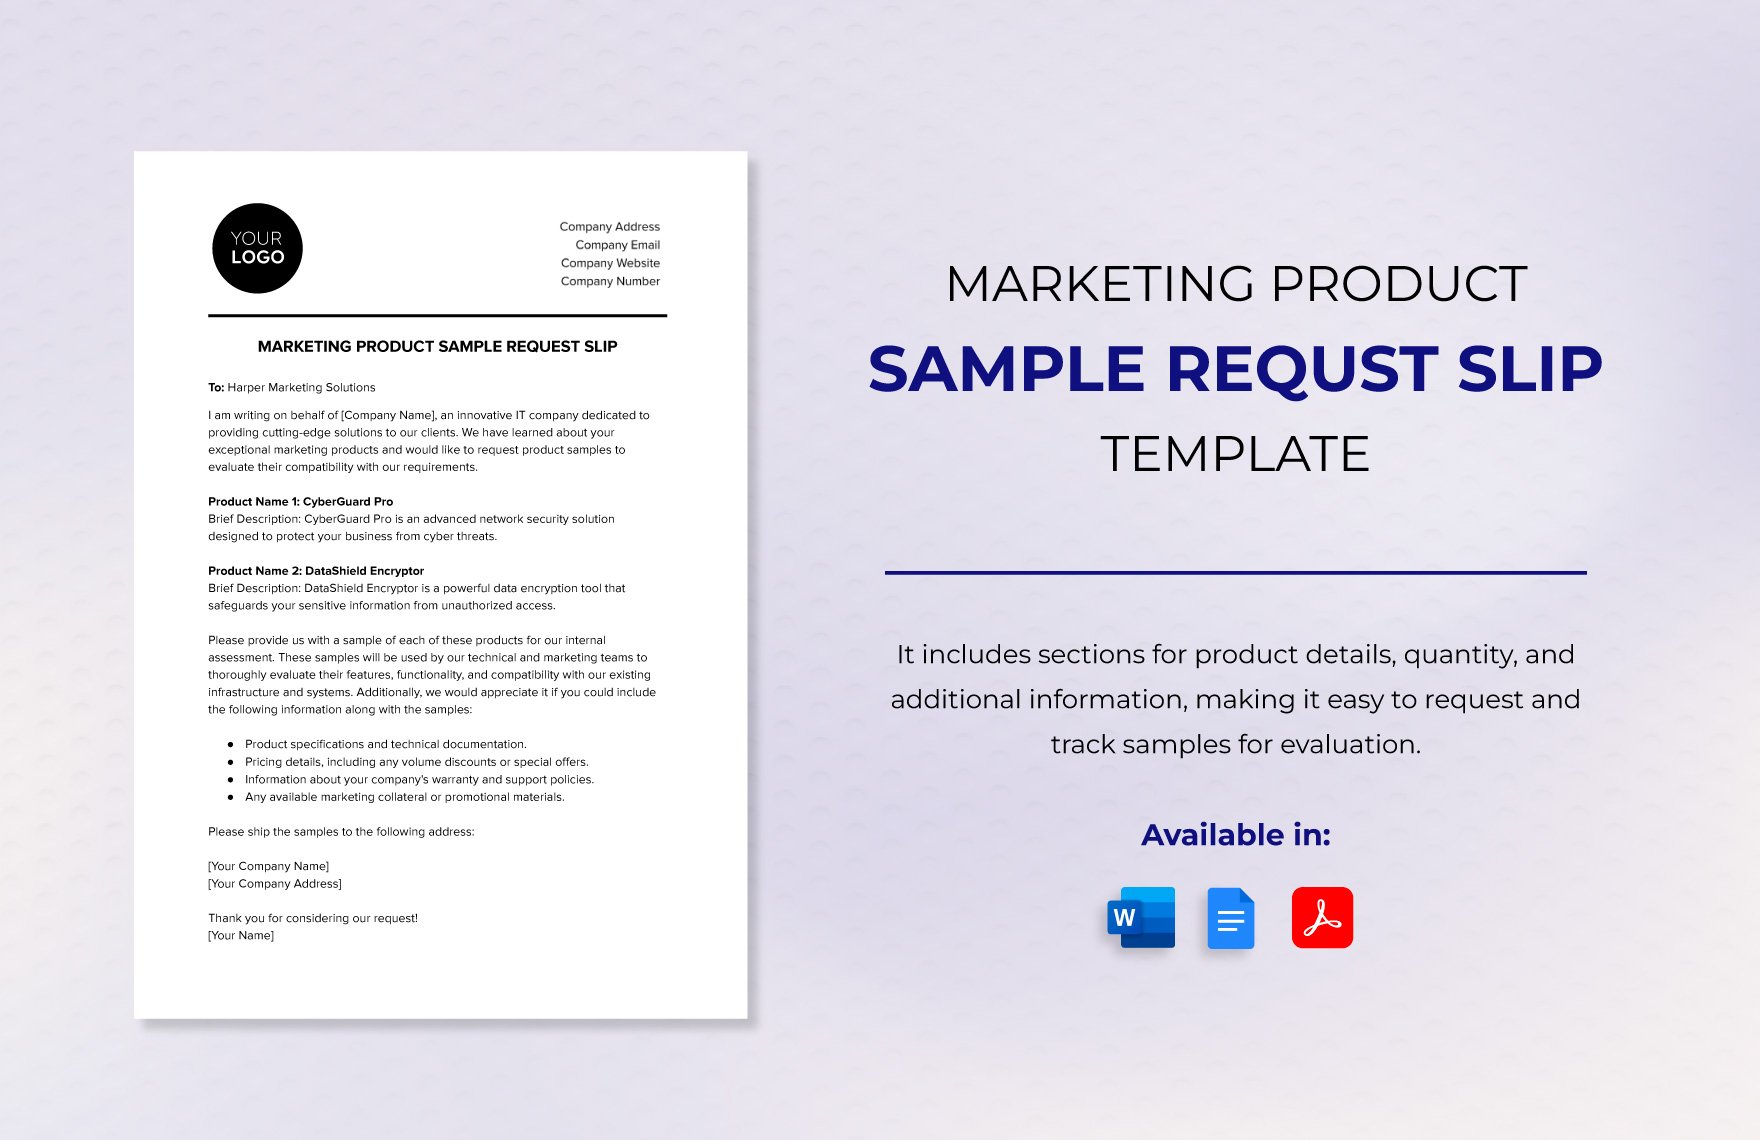 Marketing Product Sample Request Slip Template in Word, Google Docs, PDF